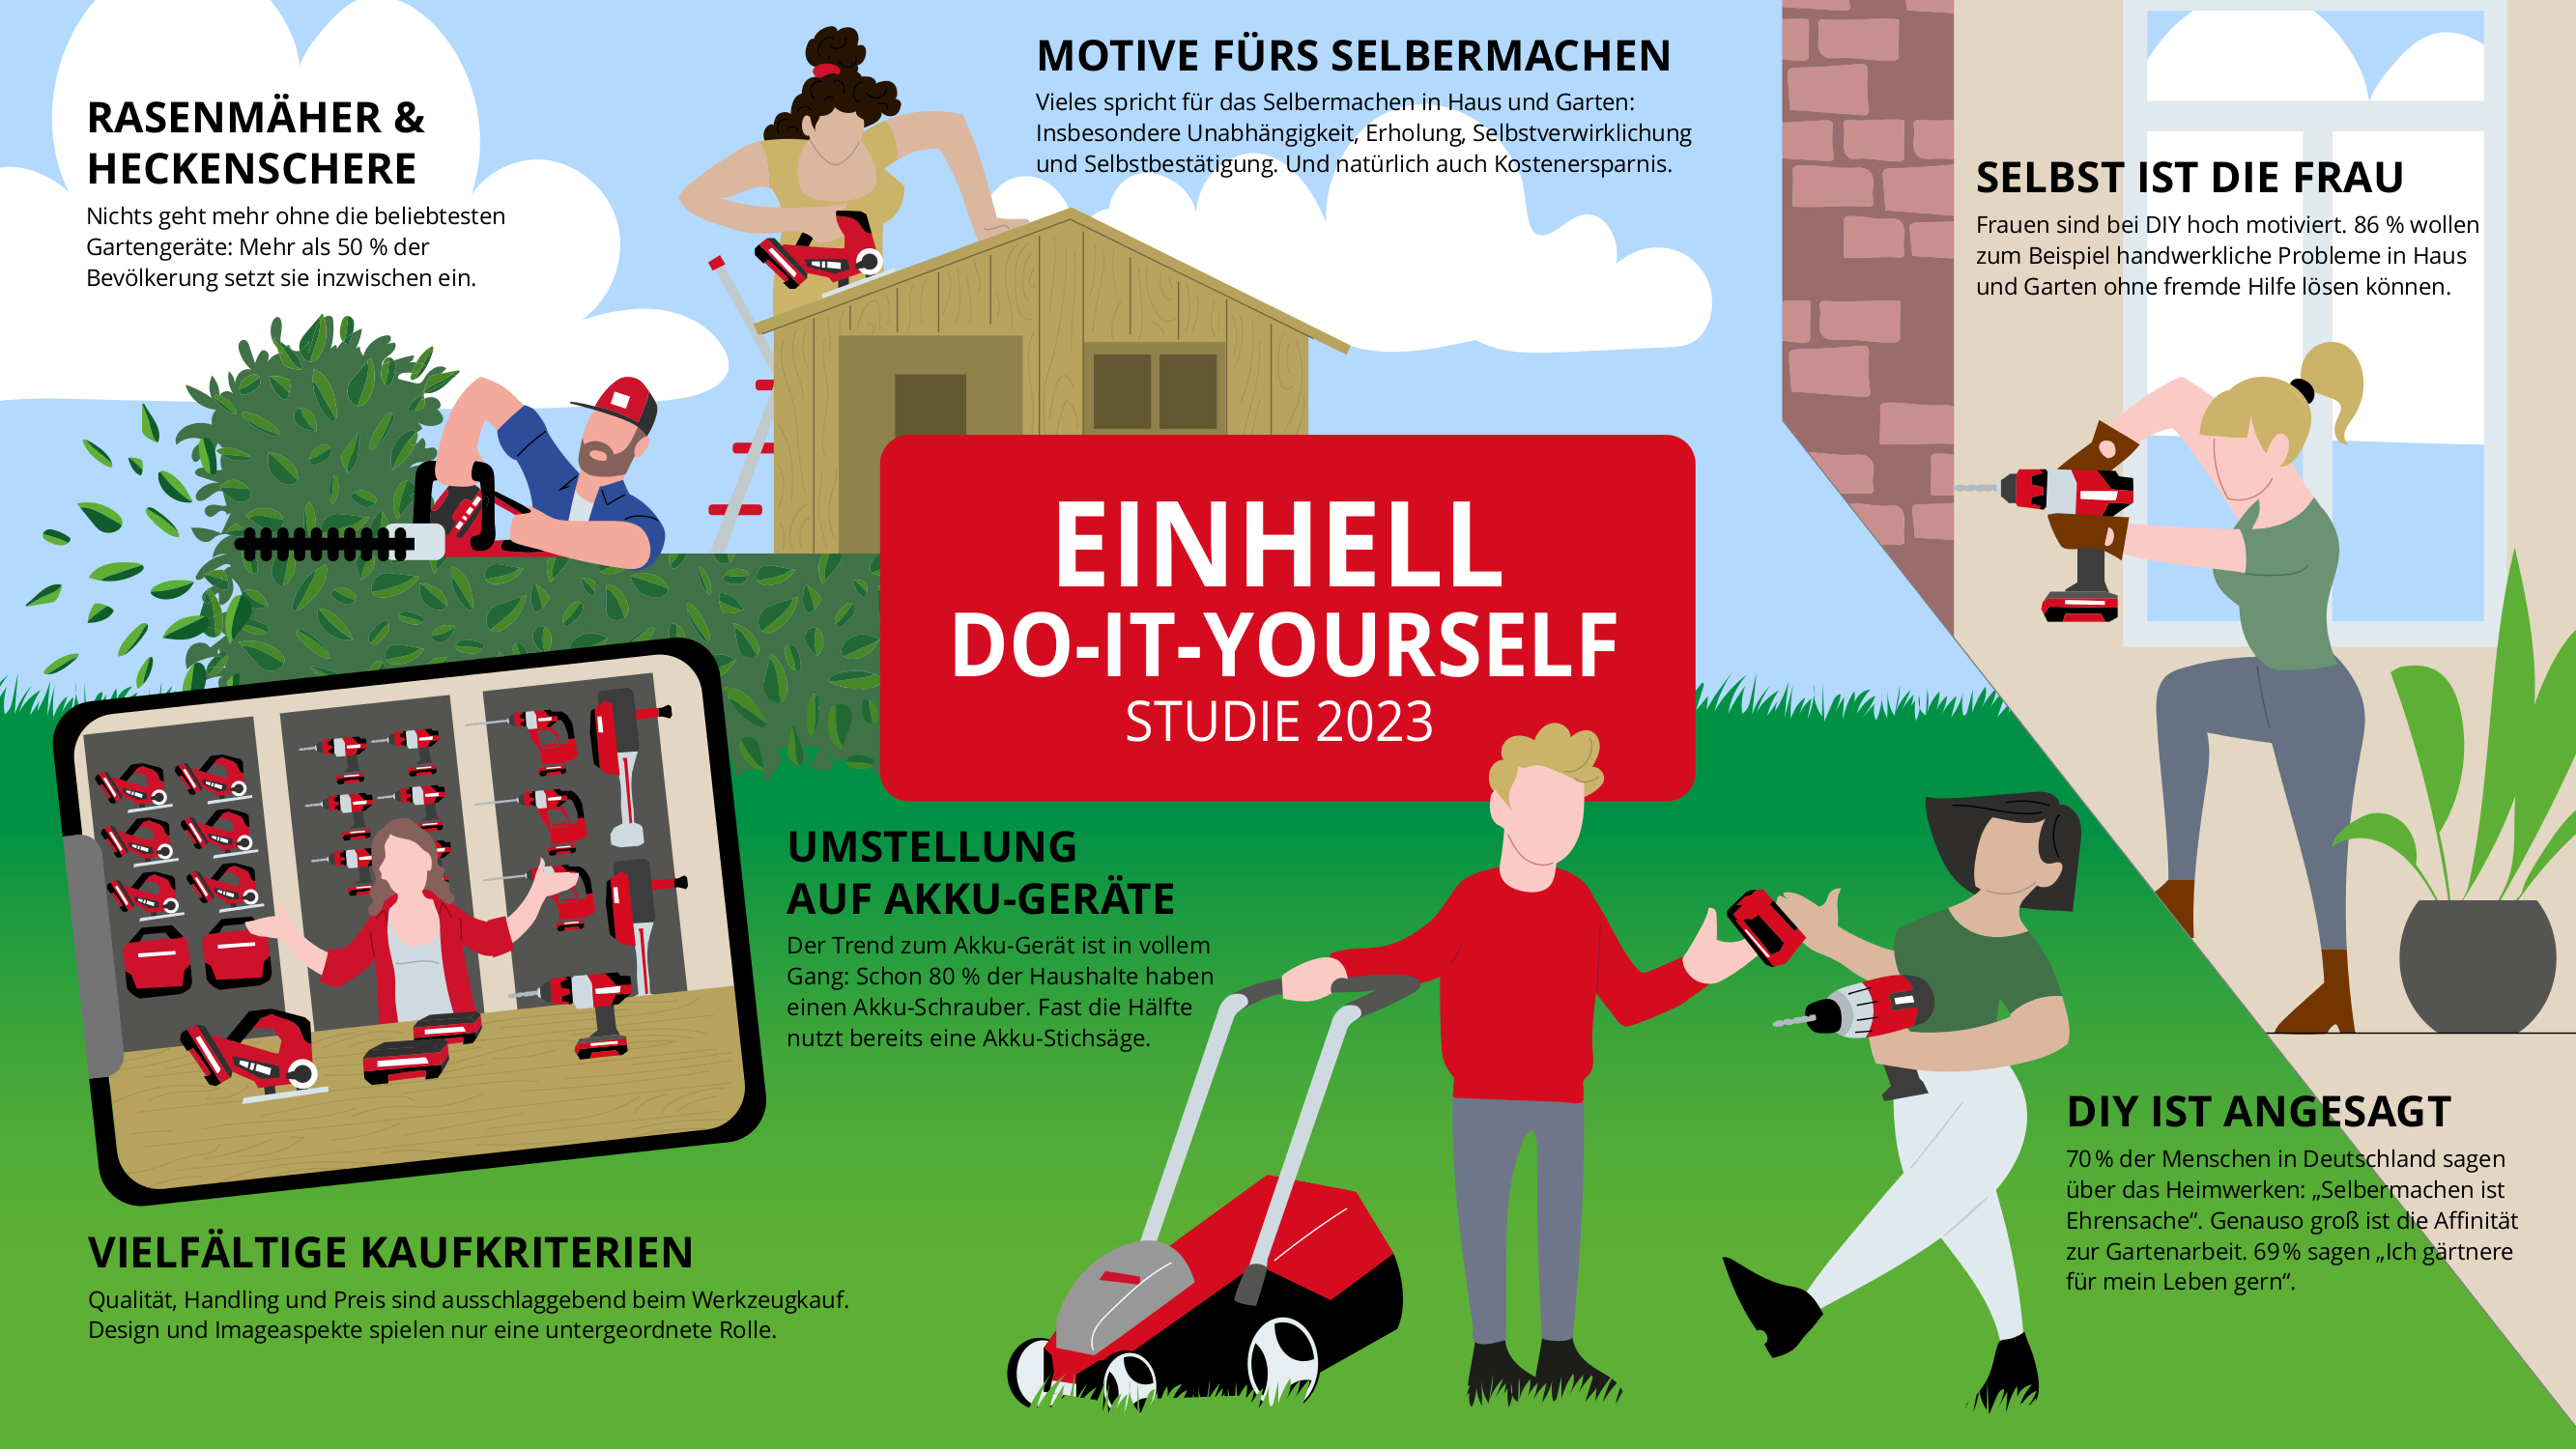 Quelle: Einhell Germany AG